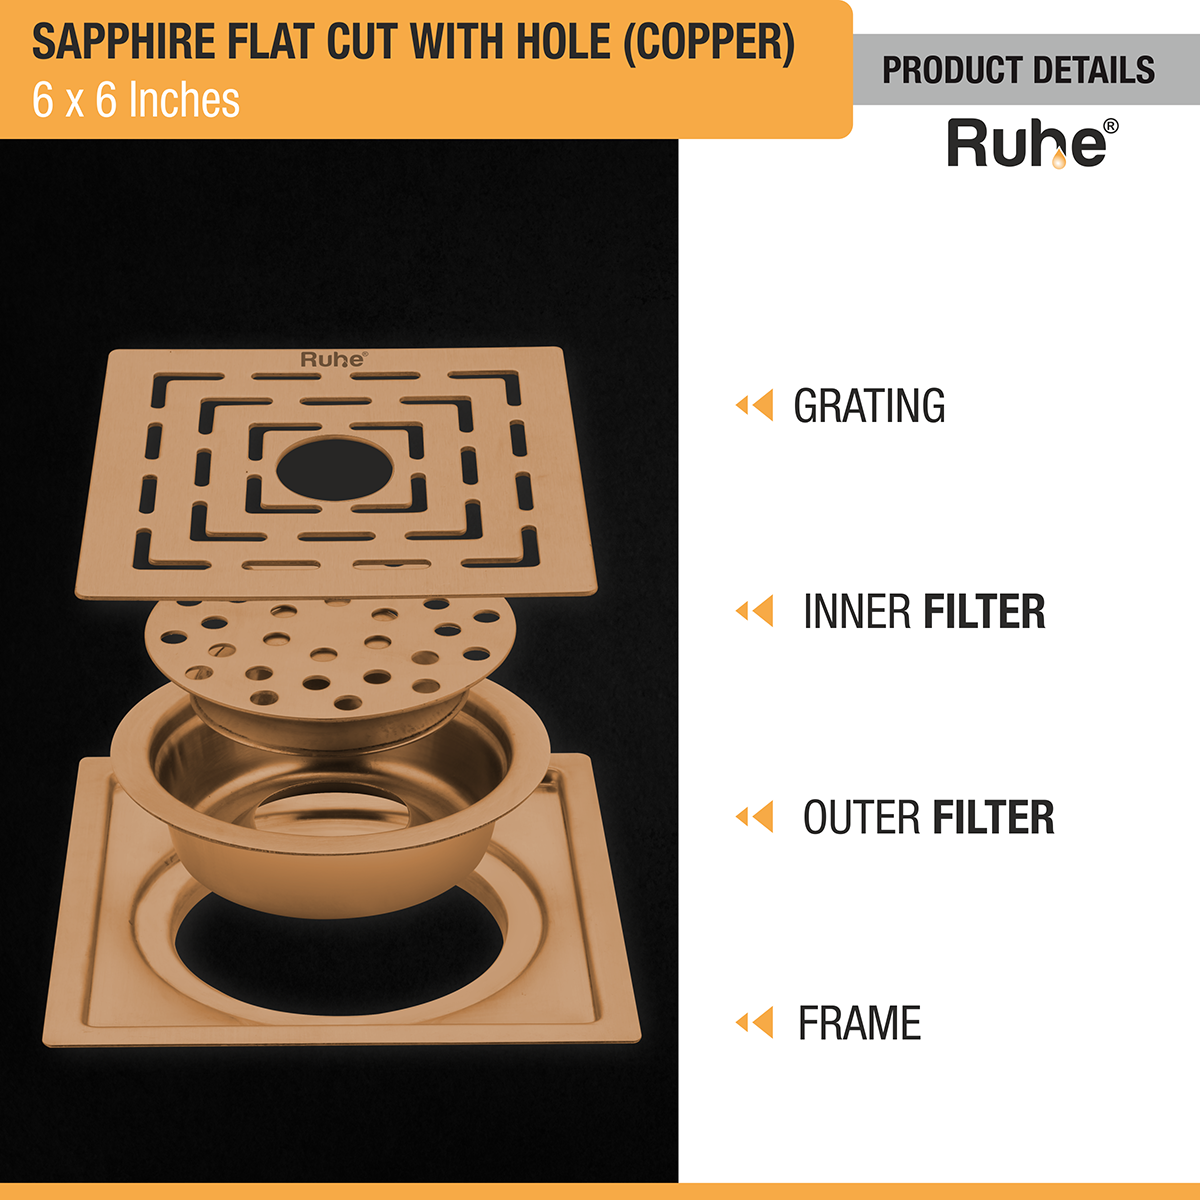 Sapphire Square Flat Cut Floor Drain in Antique Copper PVD Coating (6 x 6 Inches) with Hole product details